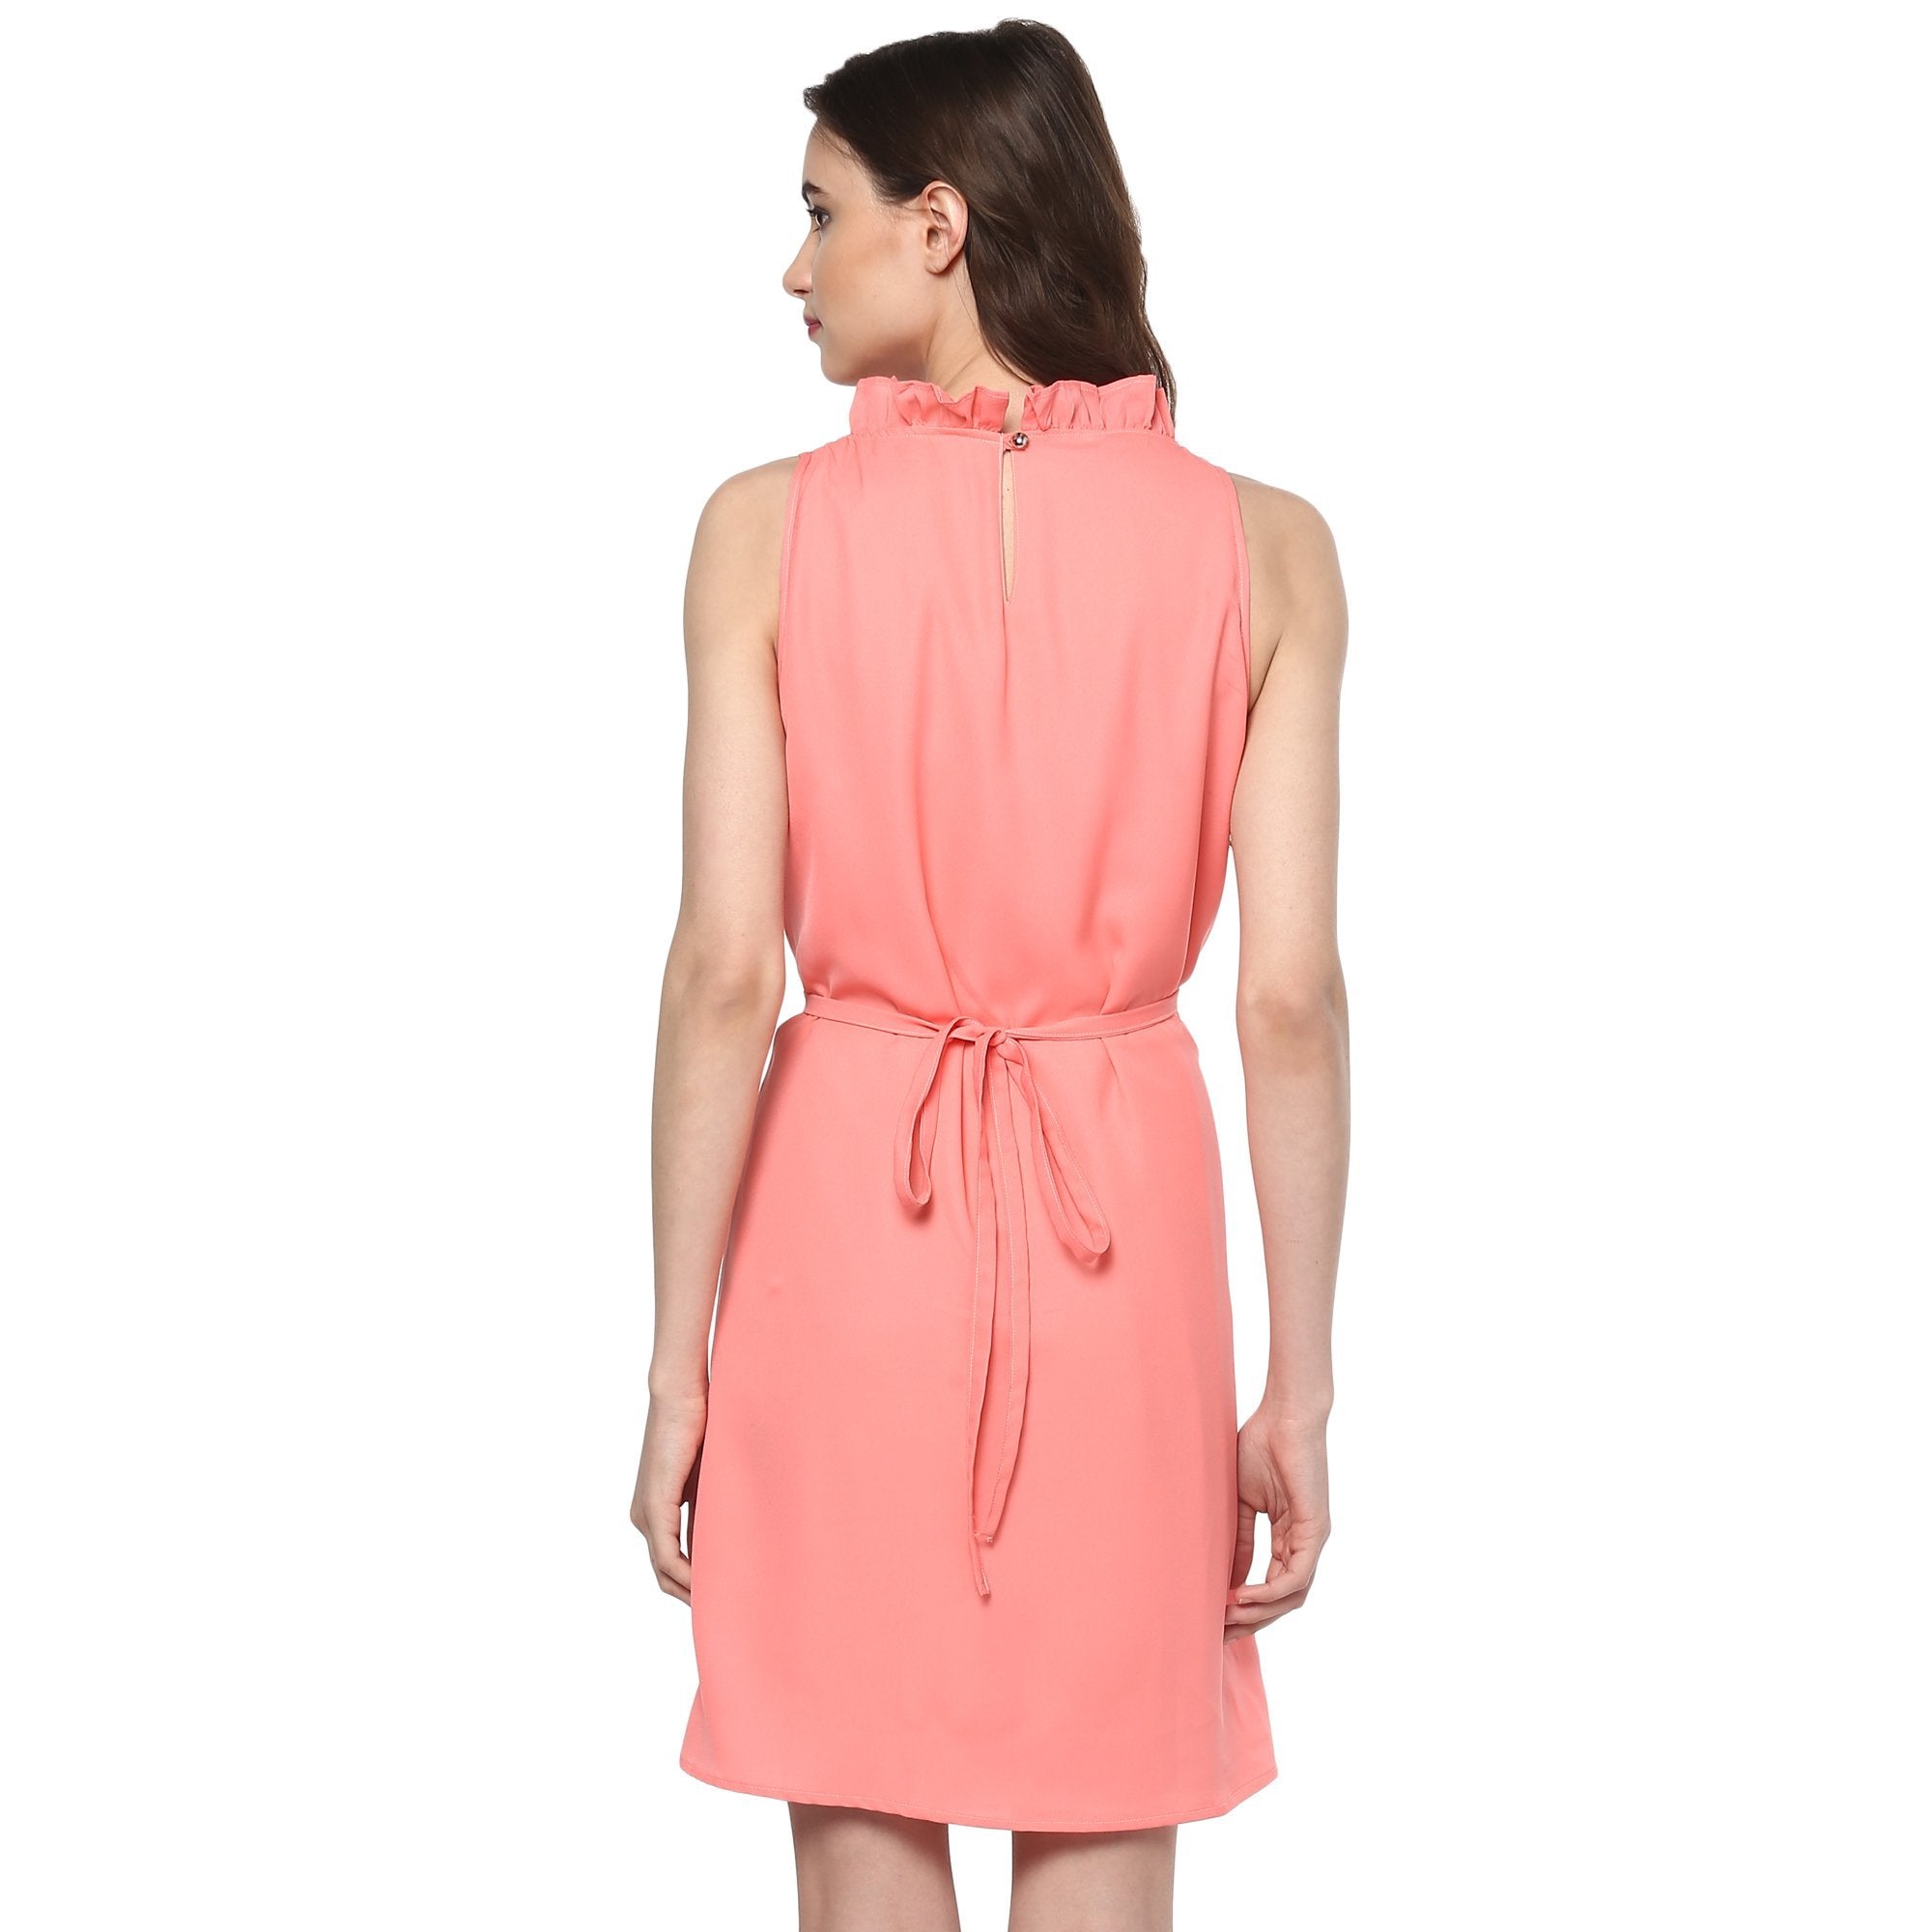 Women's Solid Flared Dress - Pannkh